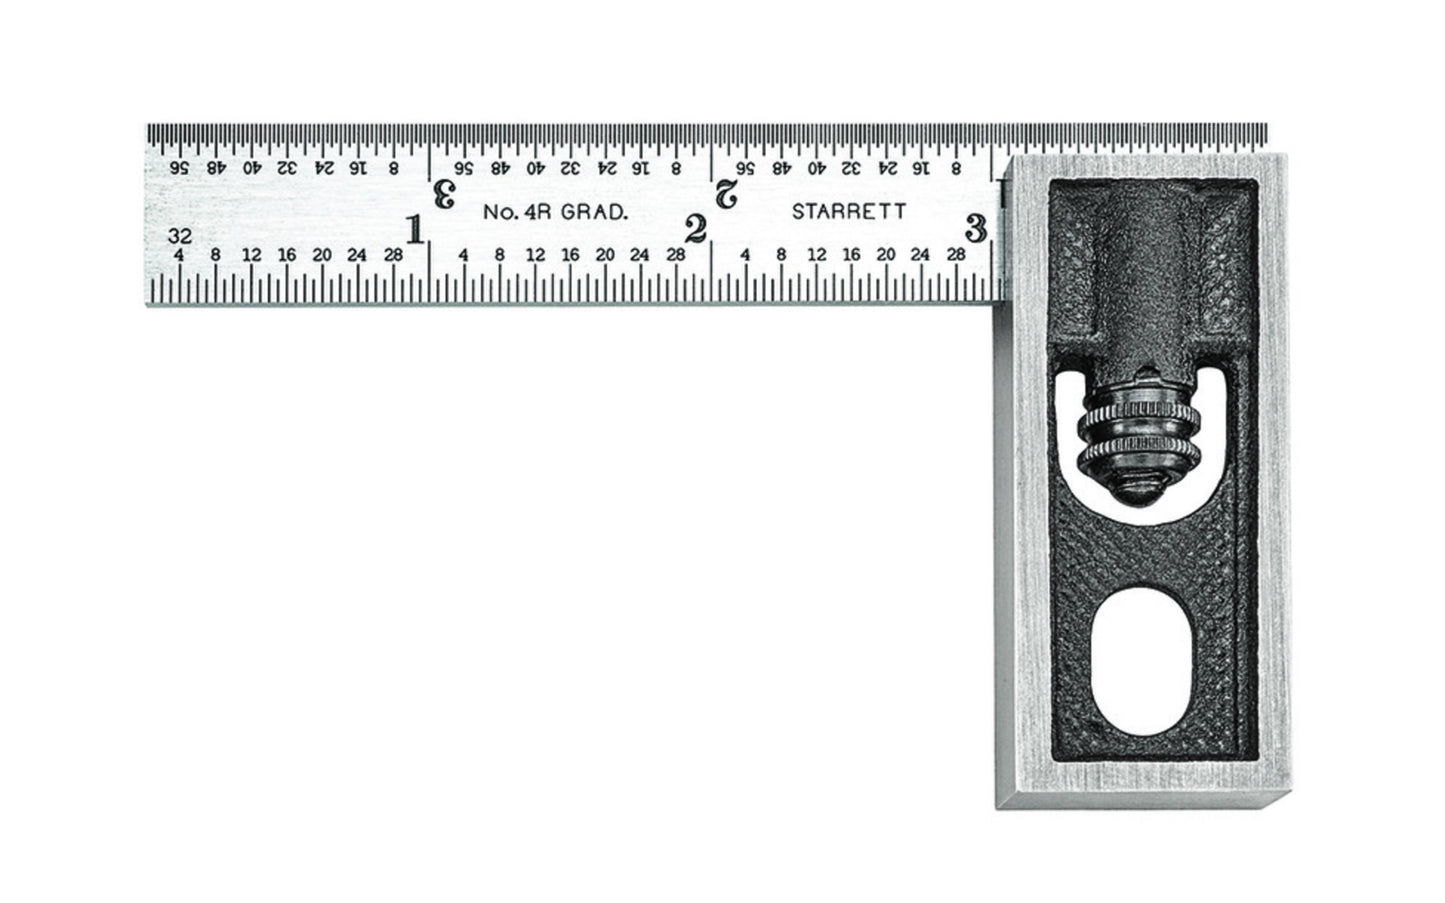 Starrett Inch Reading Double Square is very popular with machinists, toolmakers, & patternmakers. The sliding blades are adjustable making it practical for a wide variety of uses. The faces of the head are ground square. 4" Size. Model 13A. EDP 50109. Made in USA. 049659501094